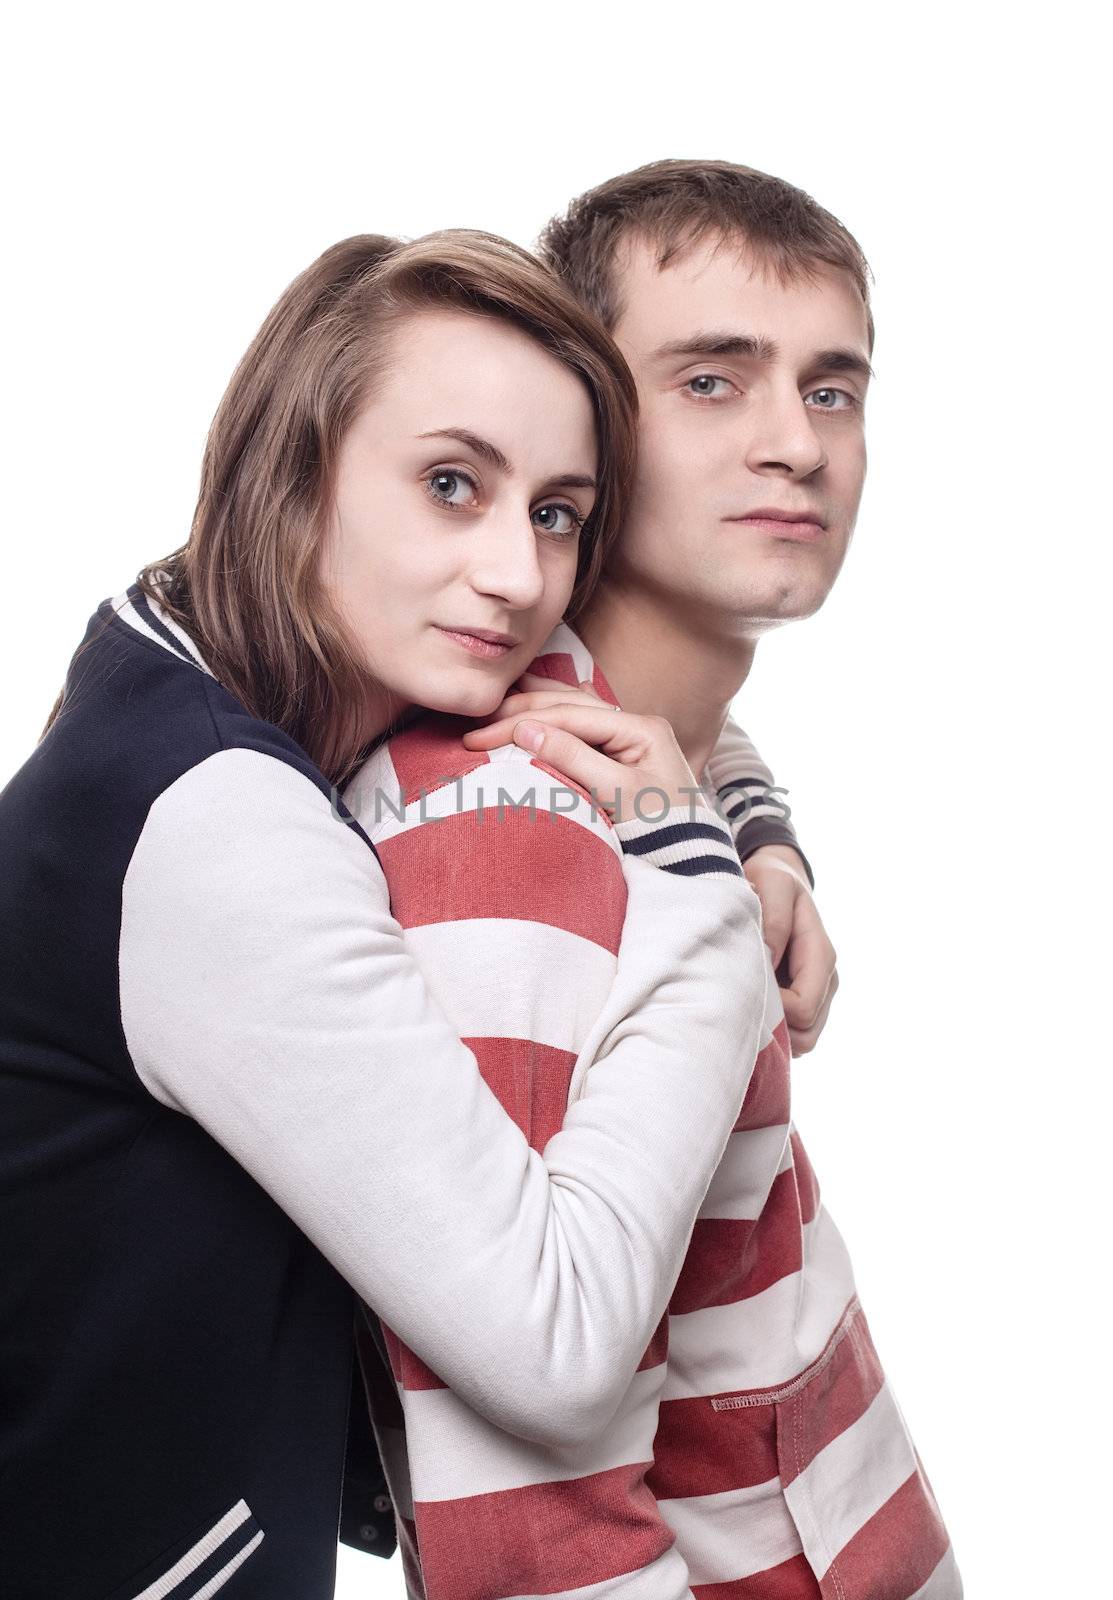 Portrait of a girl with a young man isolated on white. Focus on girl